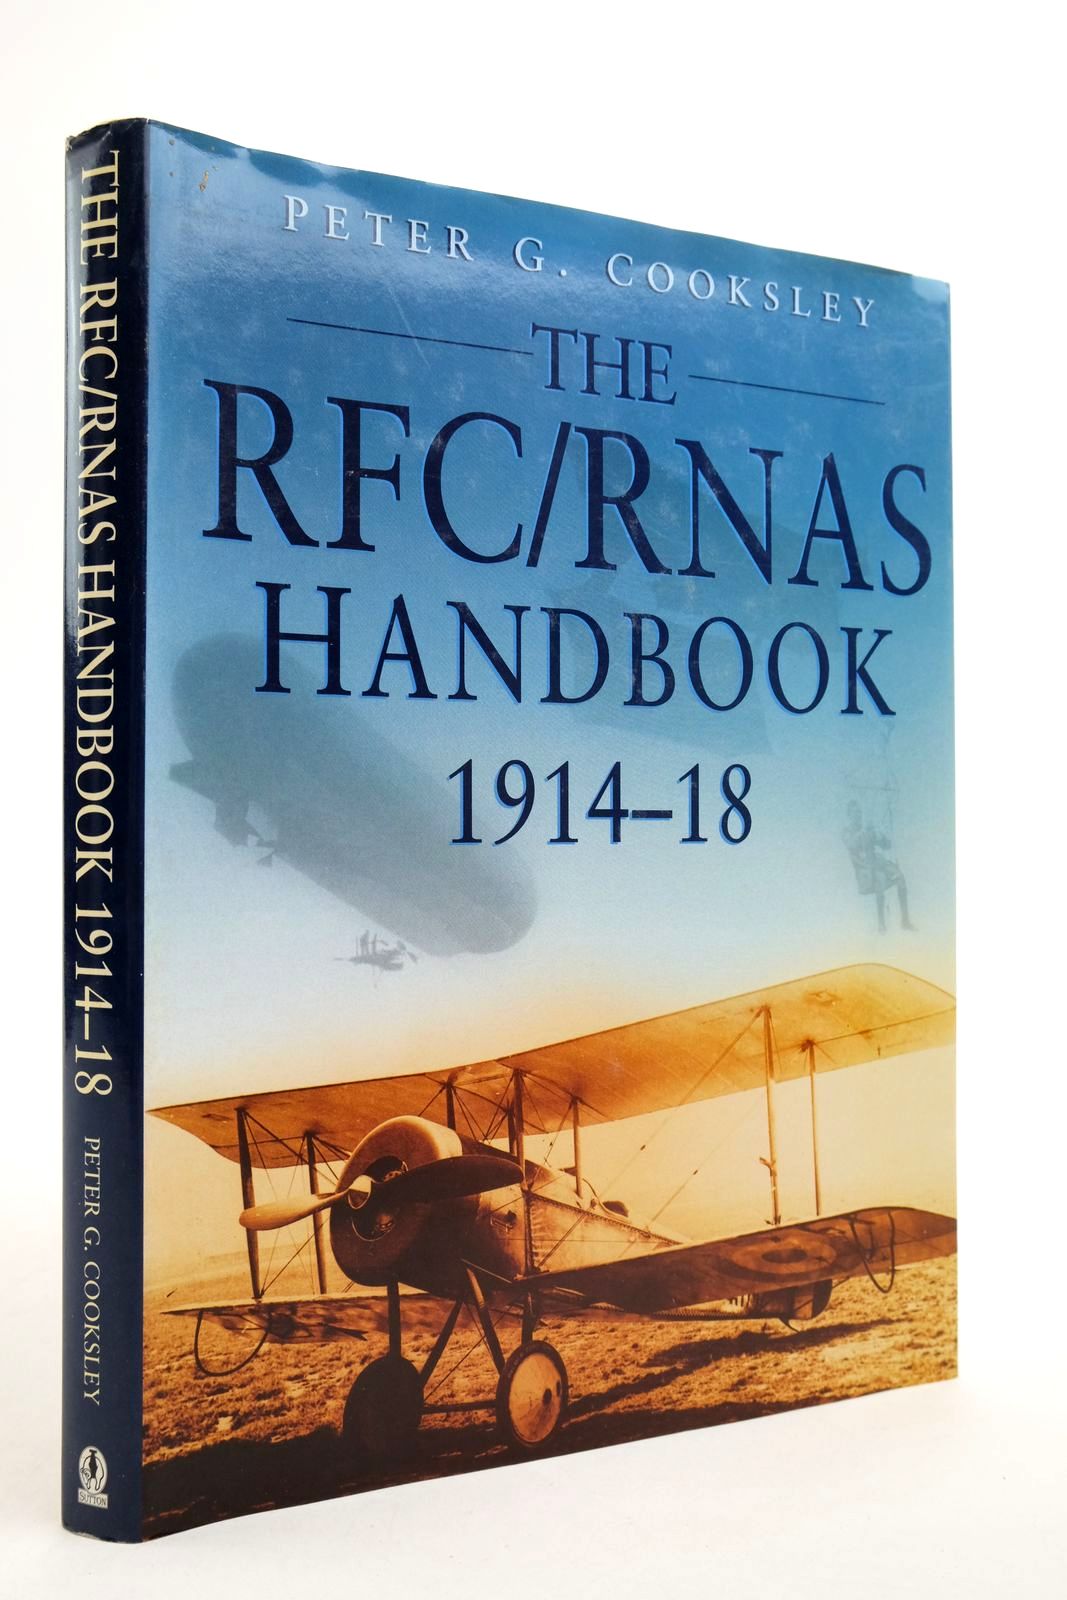 Photo of THE RFC/RNAS HANDBOOK 1914-18 written by Cooksley, Peter G. published by Sutton Publishing (STOCK CODE: 2140047)  for sale by Stella & Rose's Books